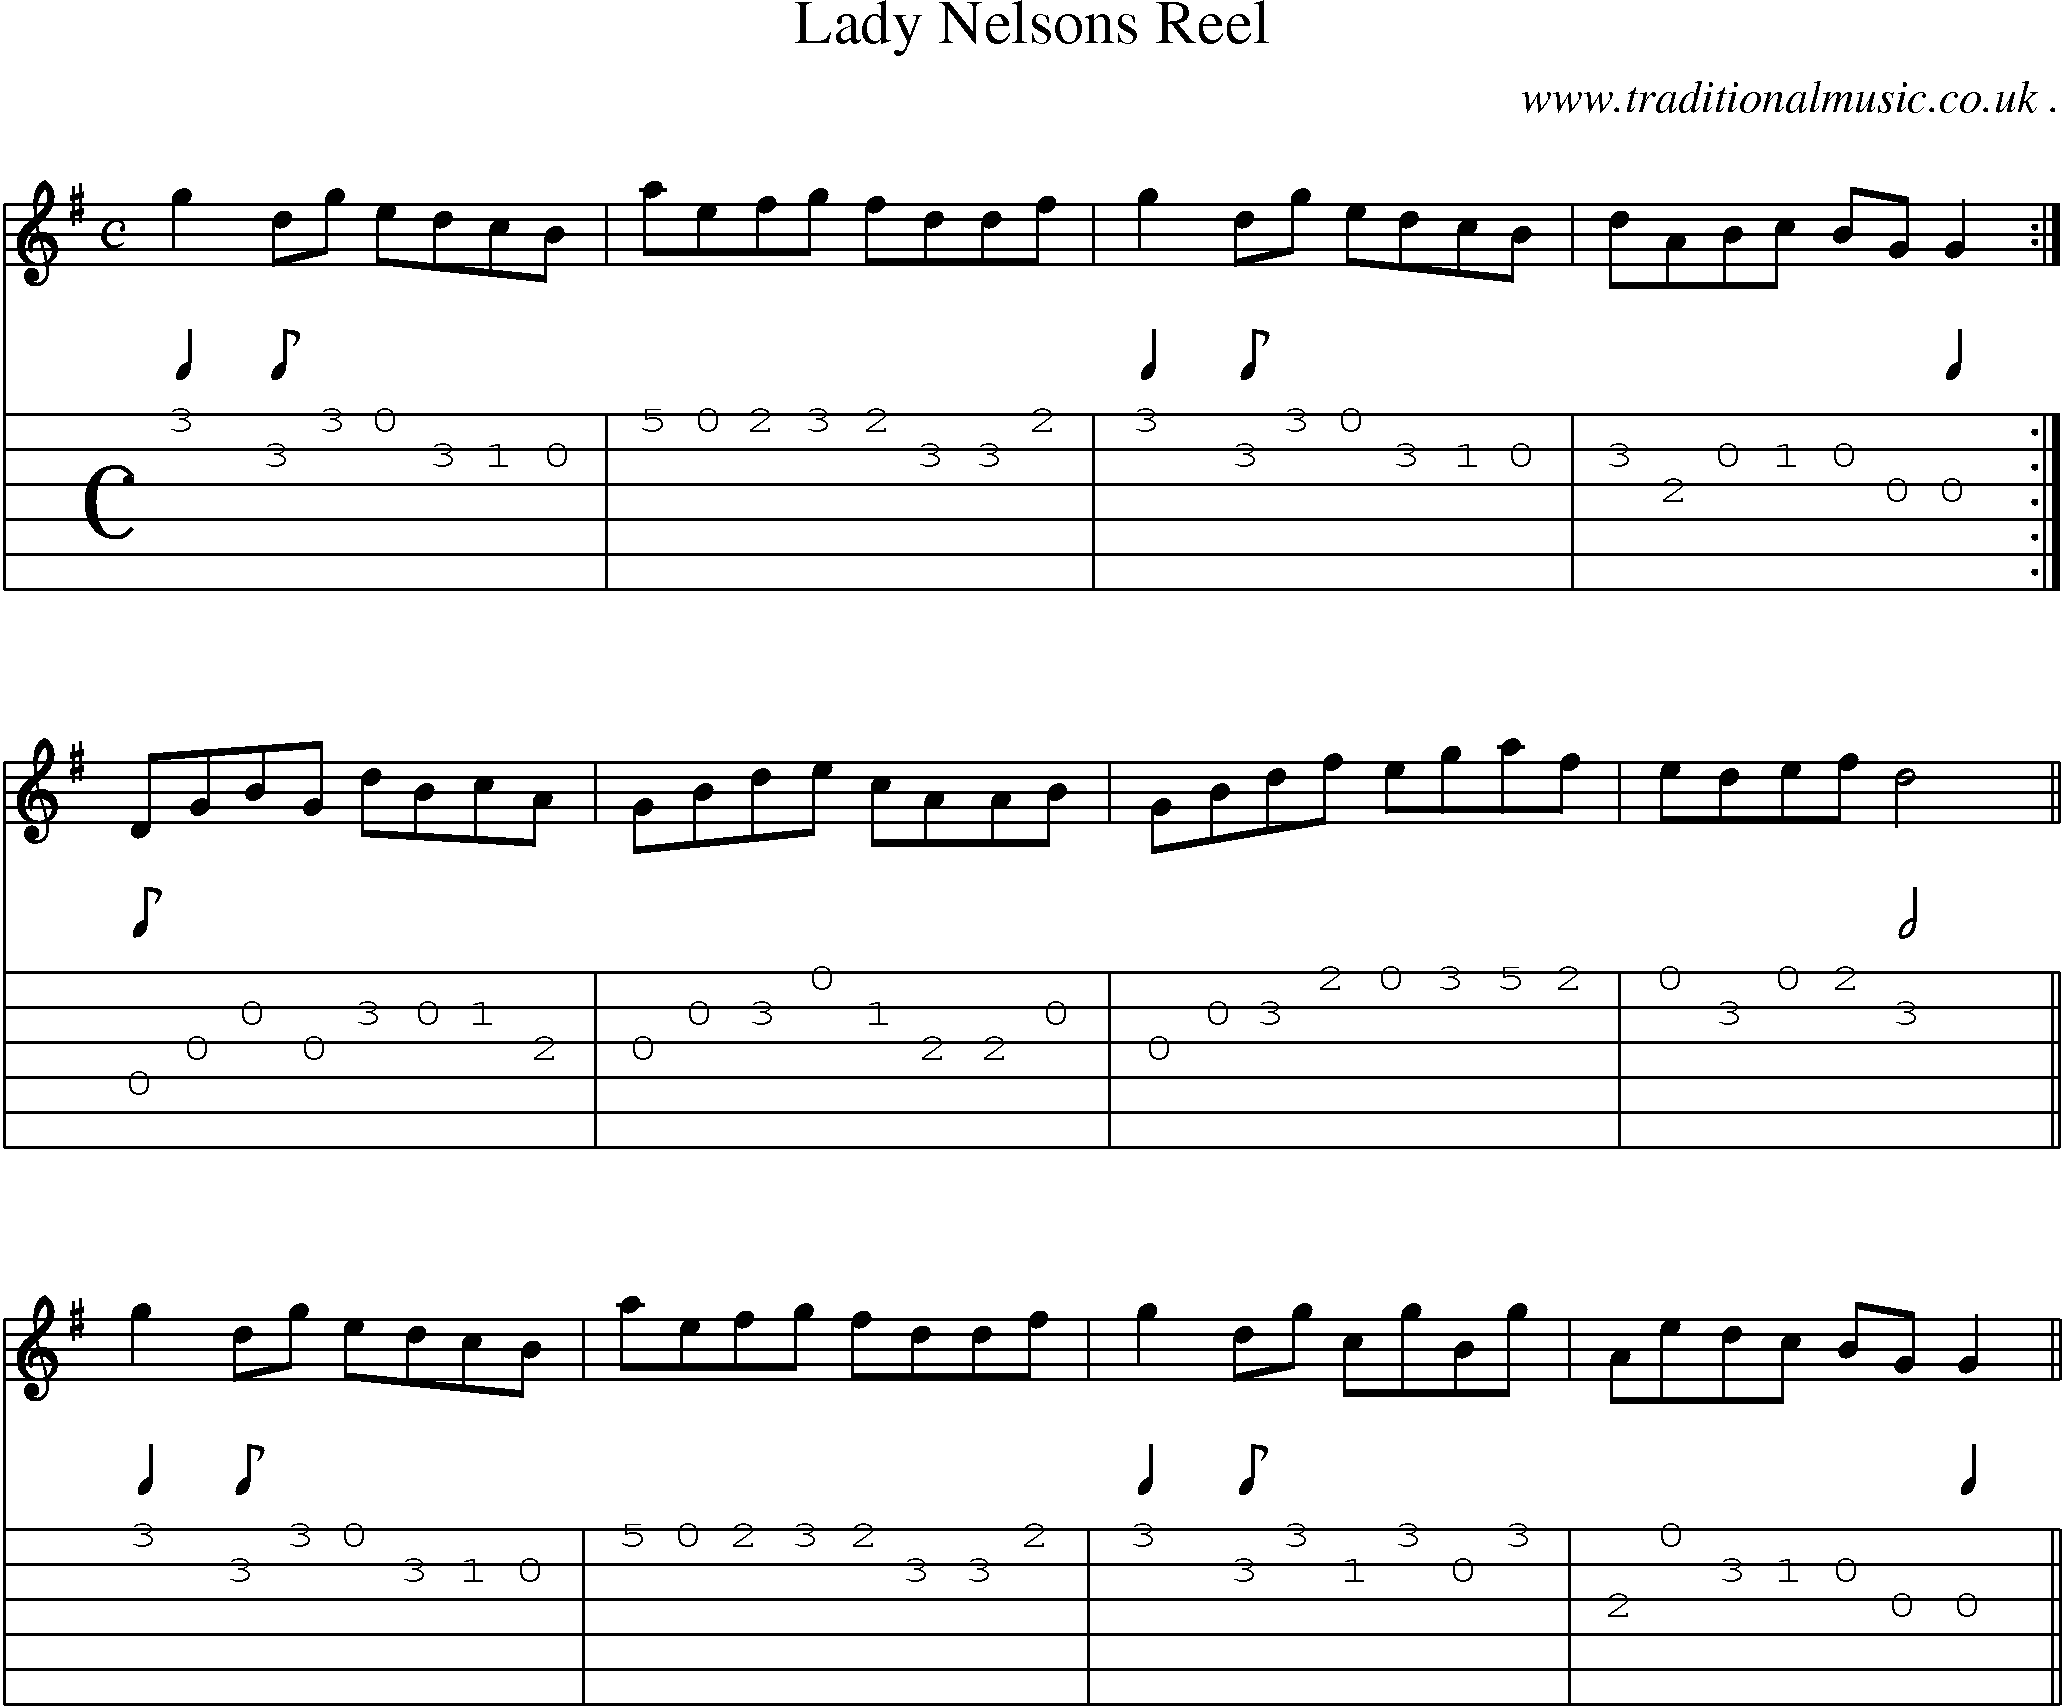 Sheet-Music and Guitar Tabs for Lady Nelsons Reel